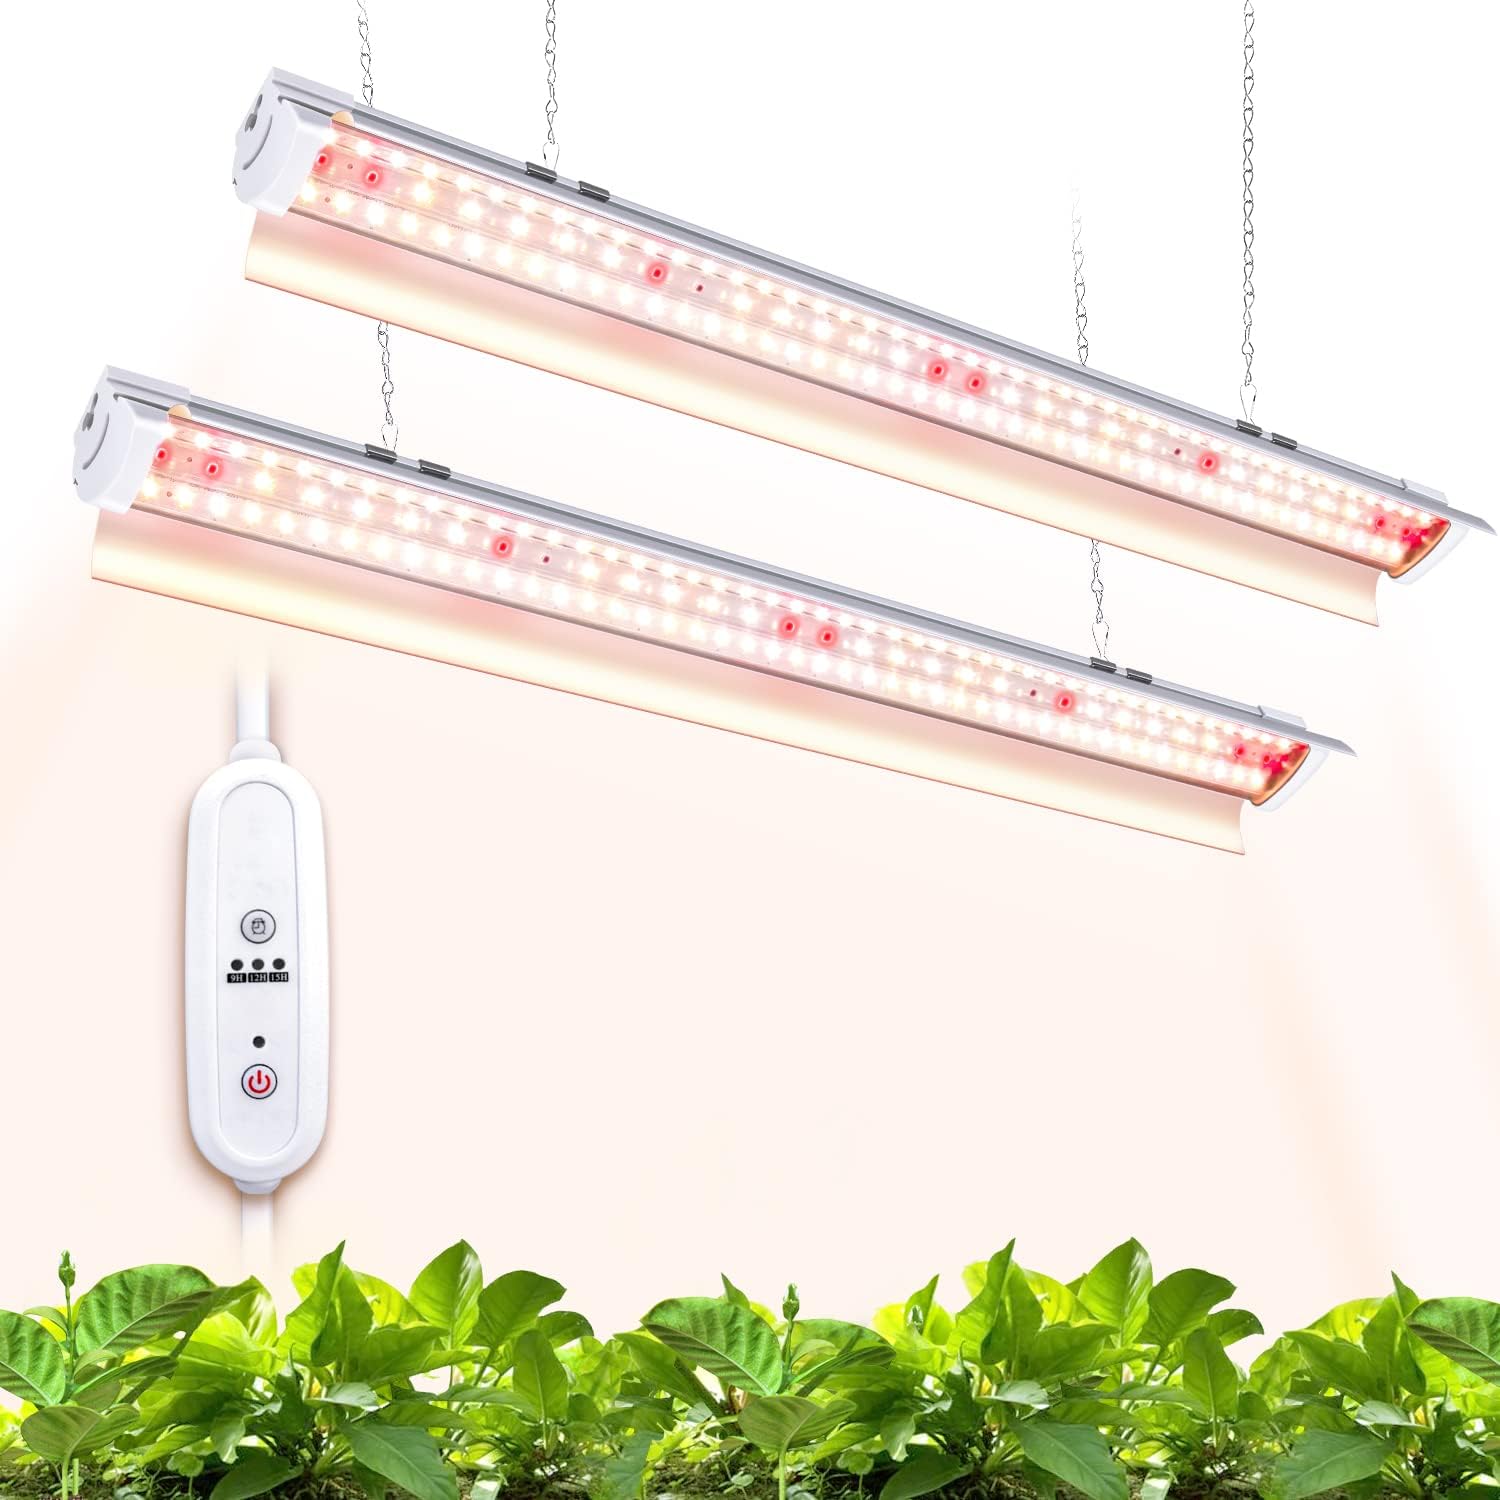 Monios-L Grow Lights for Indoor Plants with Timer, Full Spectrum with IR, 4FT 120W(2x60W,300W Equivalent), Hanging Grow Lamp with Reflector for Seedling, Flowering, Fruiting, Plug and Play, 2-Pack